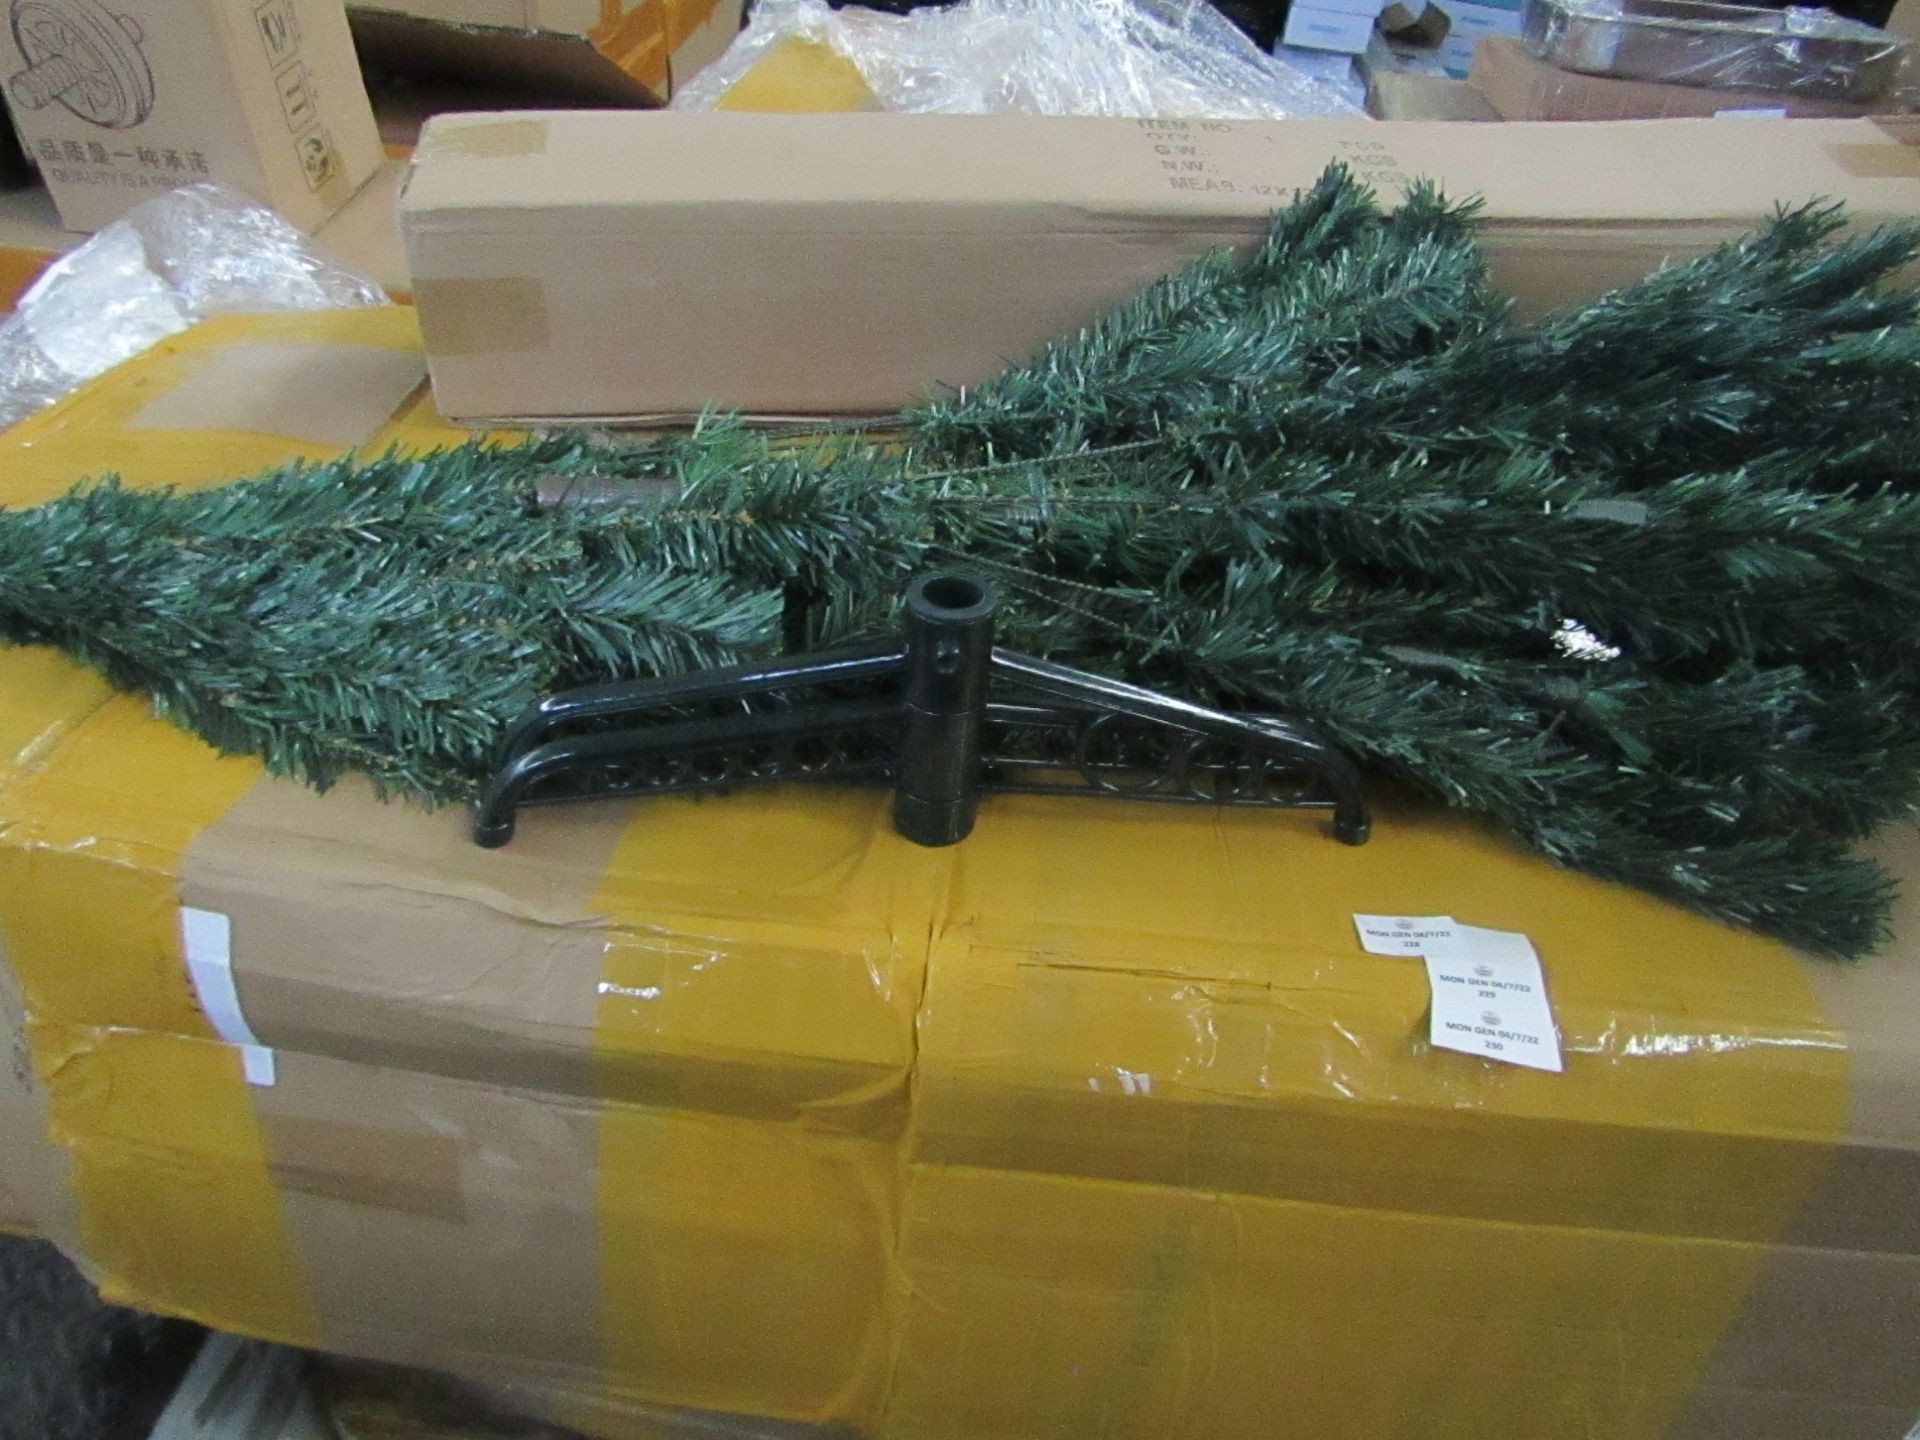 2x Household Artificial Christmas Tree Decorative Christmas Tree for Home Garden - New & Boxed.